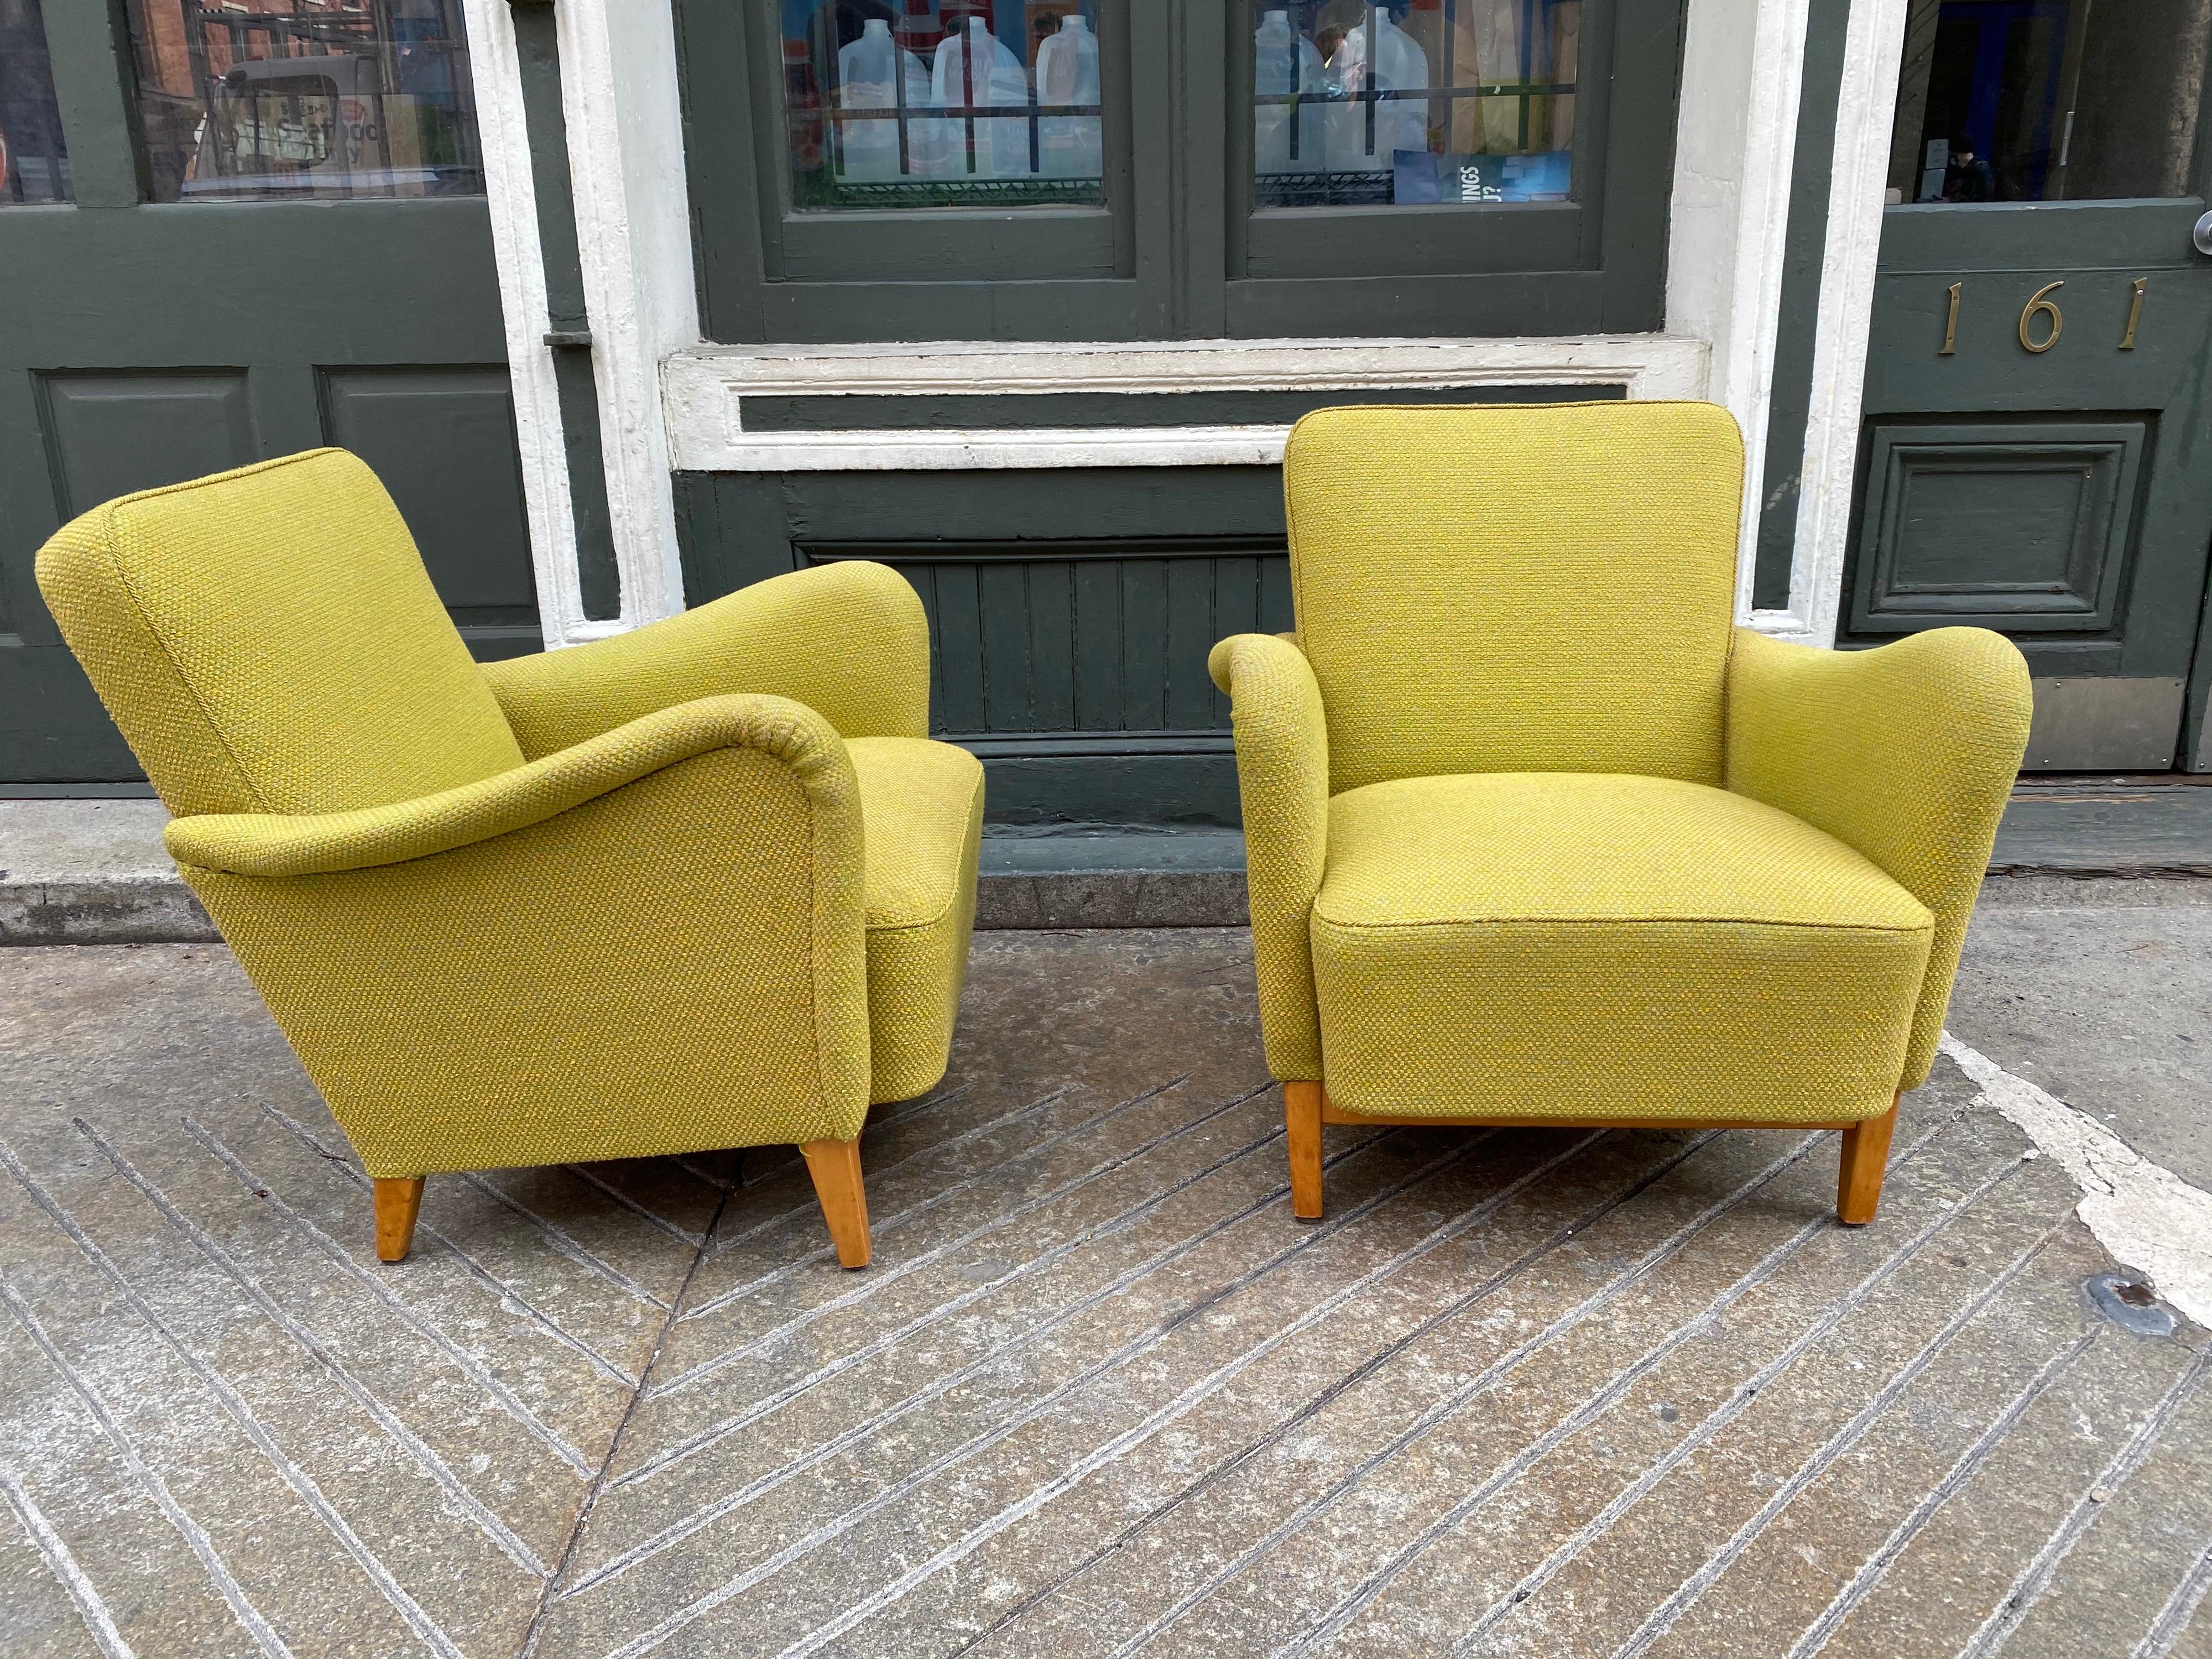 Pair of Carl Malmsten for DUX upholstered lounge chairs. Great sculptural arms that continue down the fronts of the chairs. Chairs date to the late 1940s or early 1950s Fabric is in pretty good shape, thinking they had been re-upholstered in the